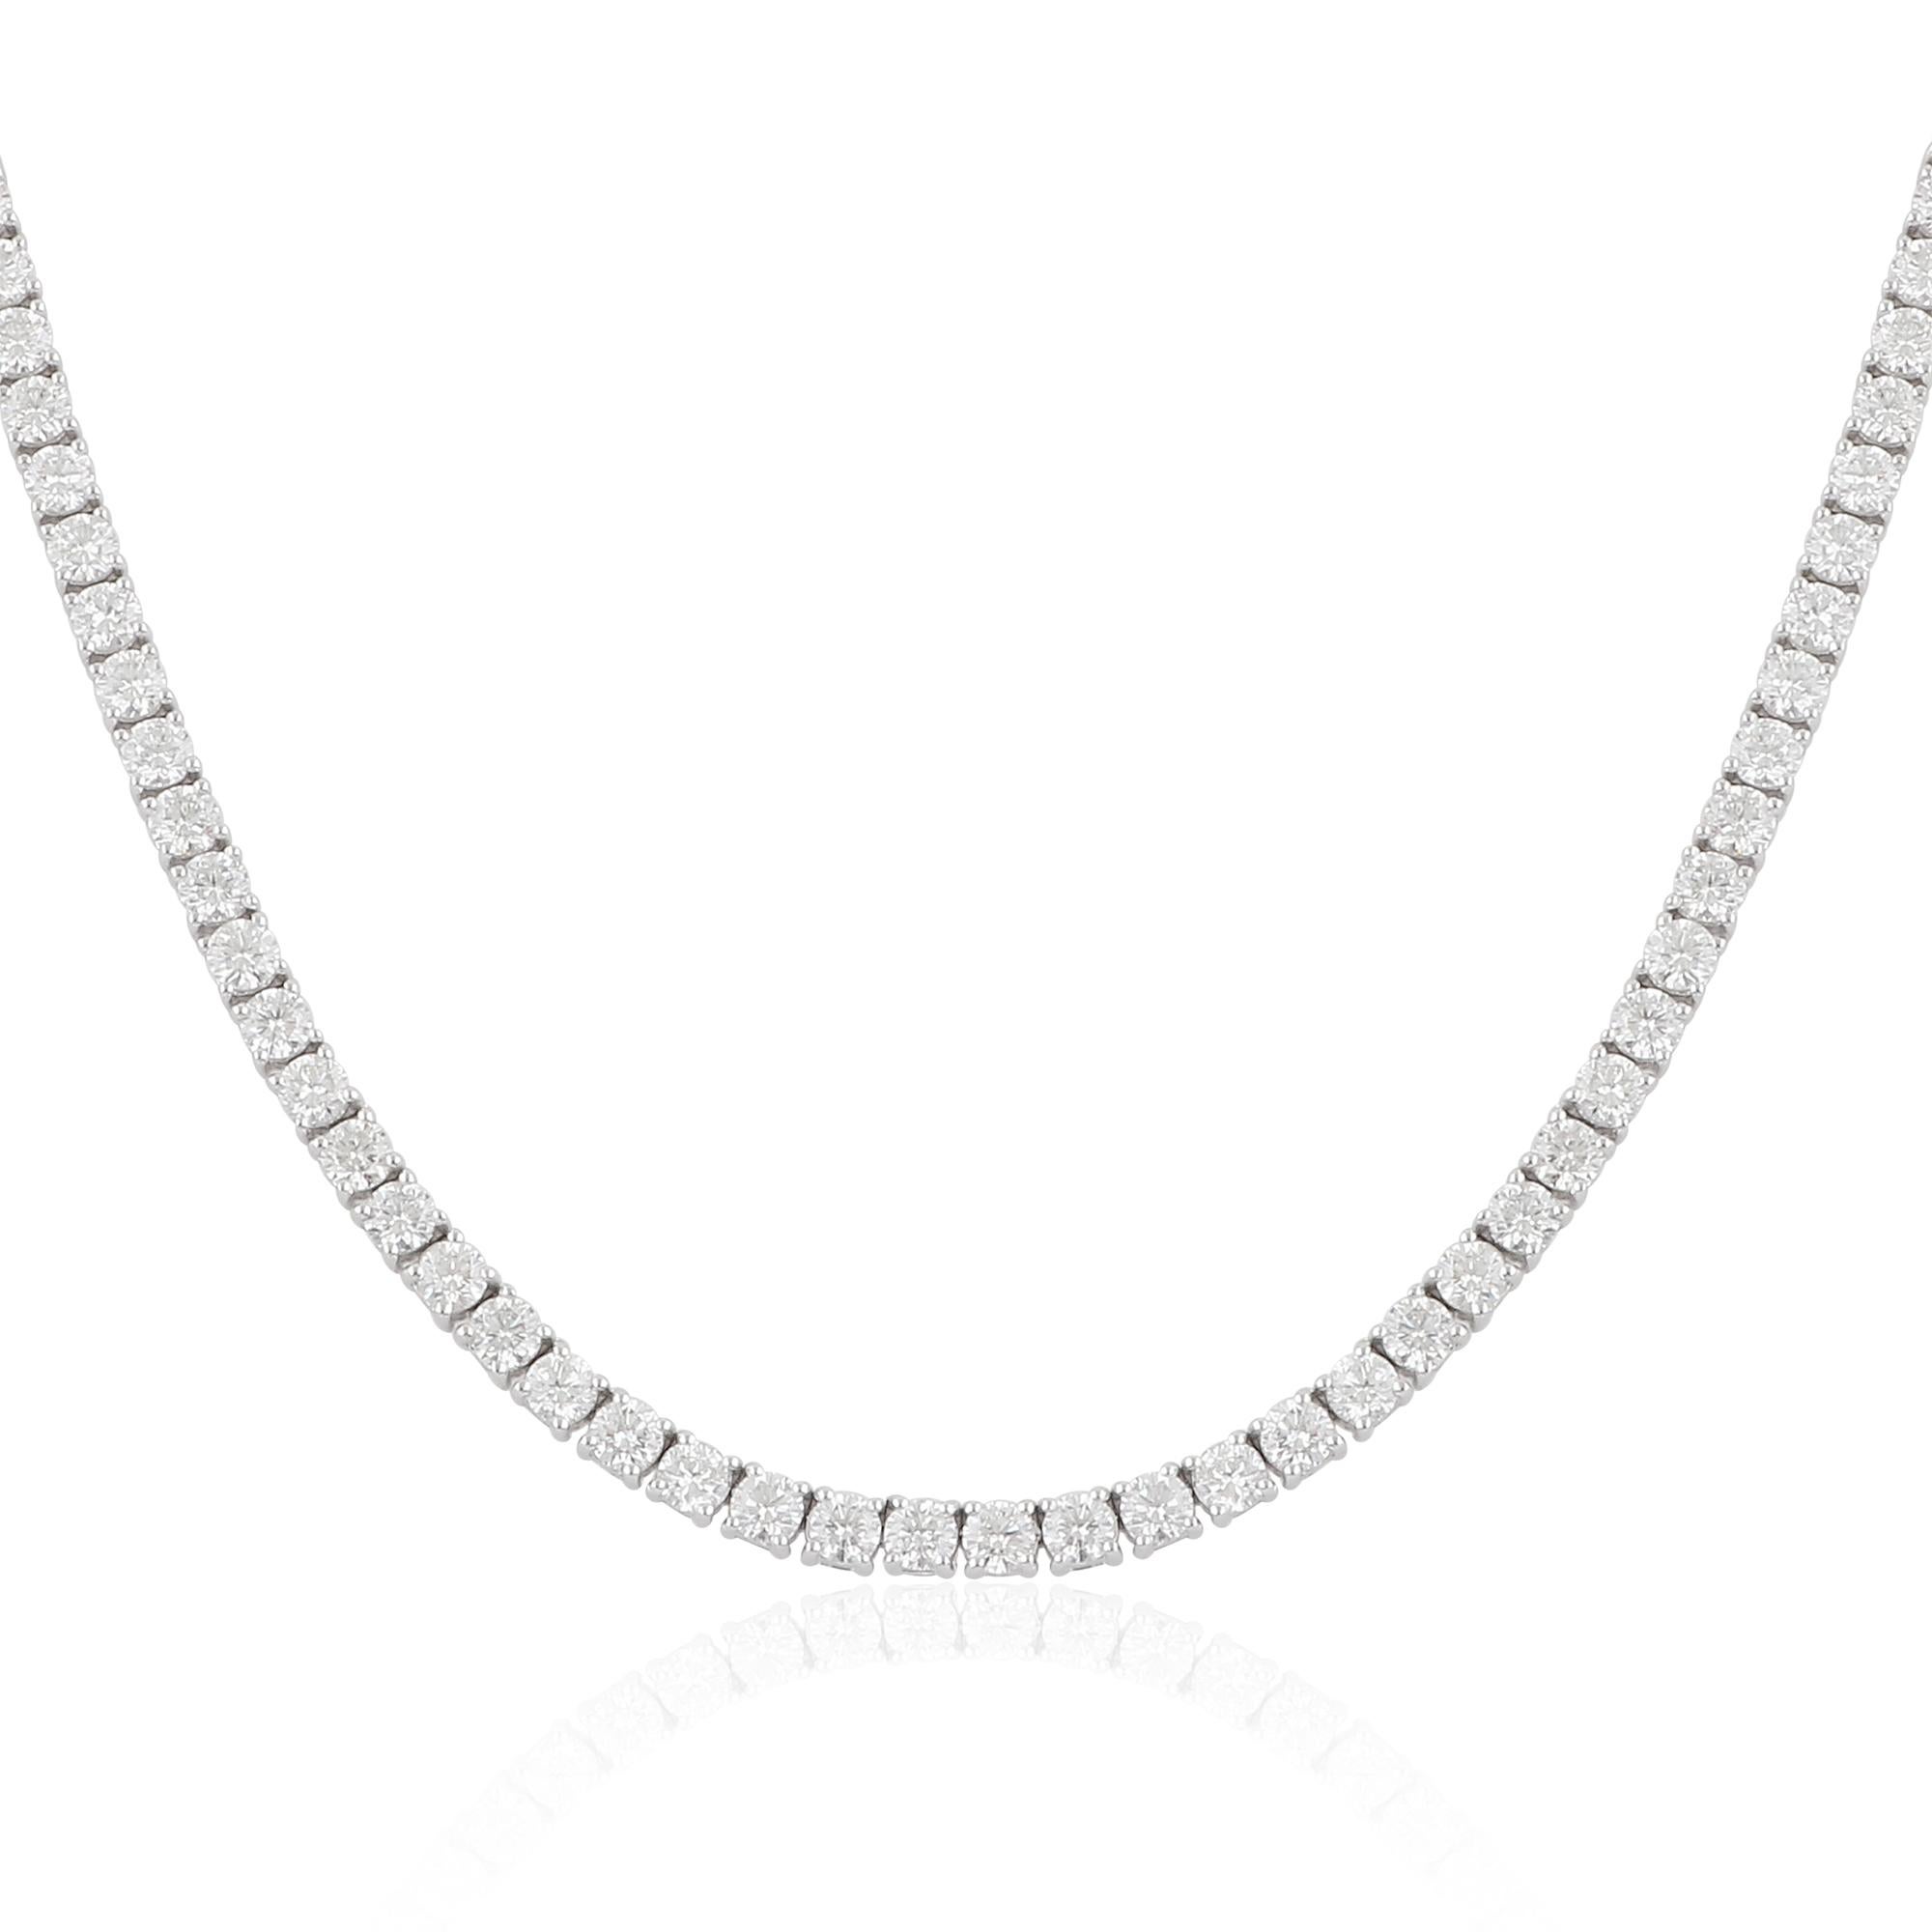 A tennis chain necklace featuring a 26.10 carat diamond in 14 karat white gold is an extraordinary and opulent piece of handmade jewelry. The necklace typically showcases a continuous line of round or square-cut diamonds set in a white gold